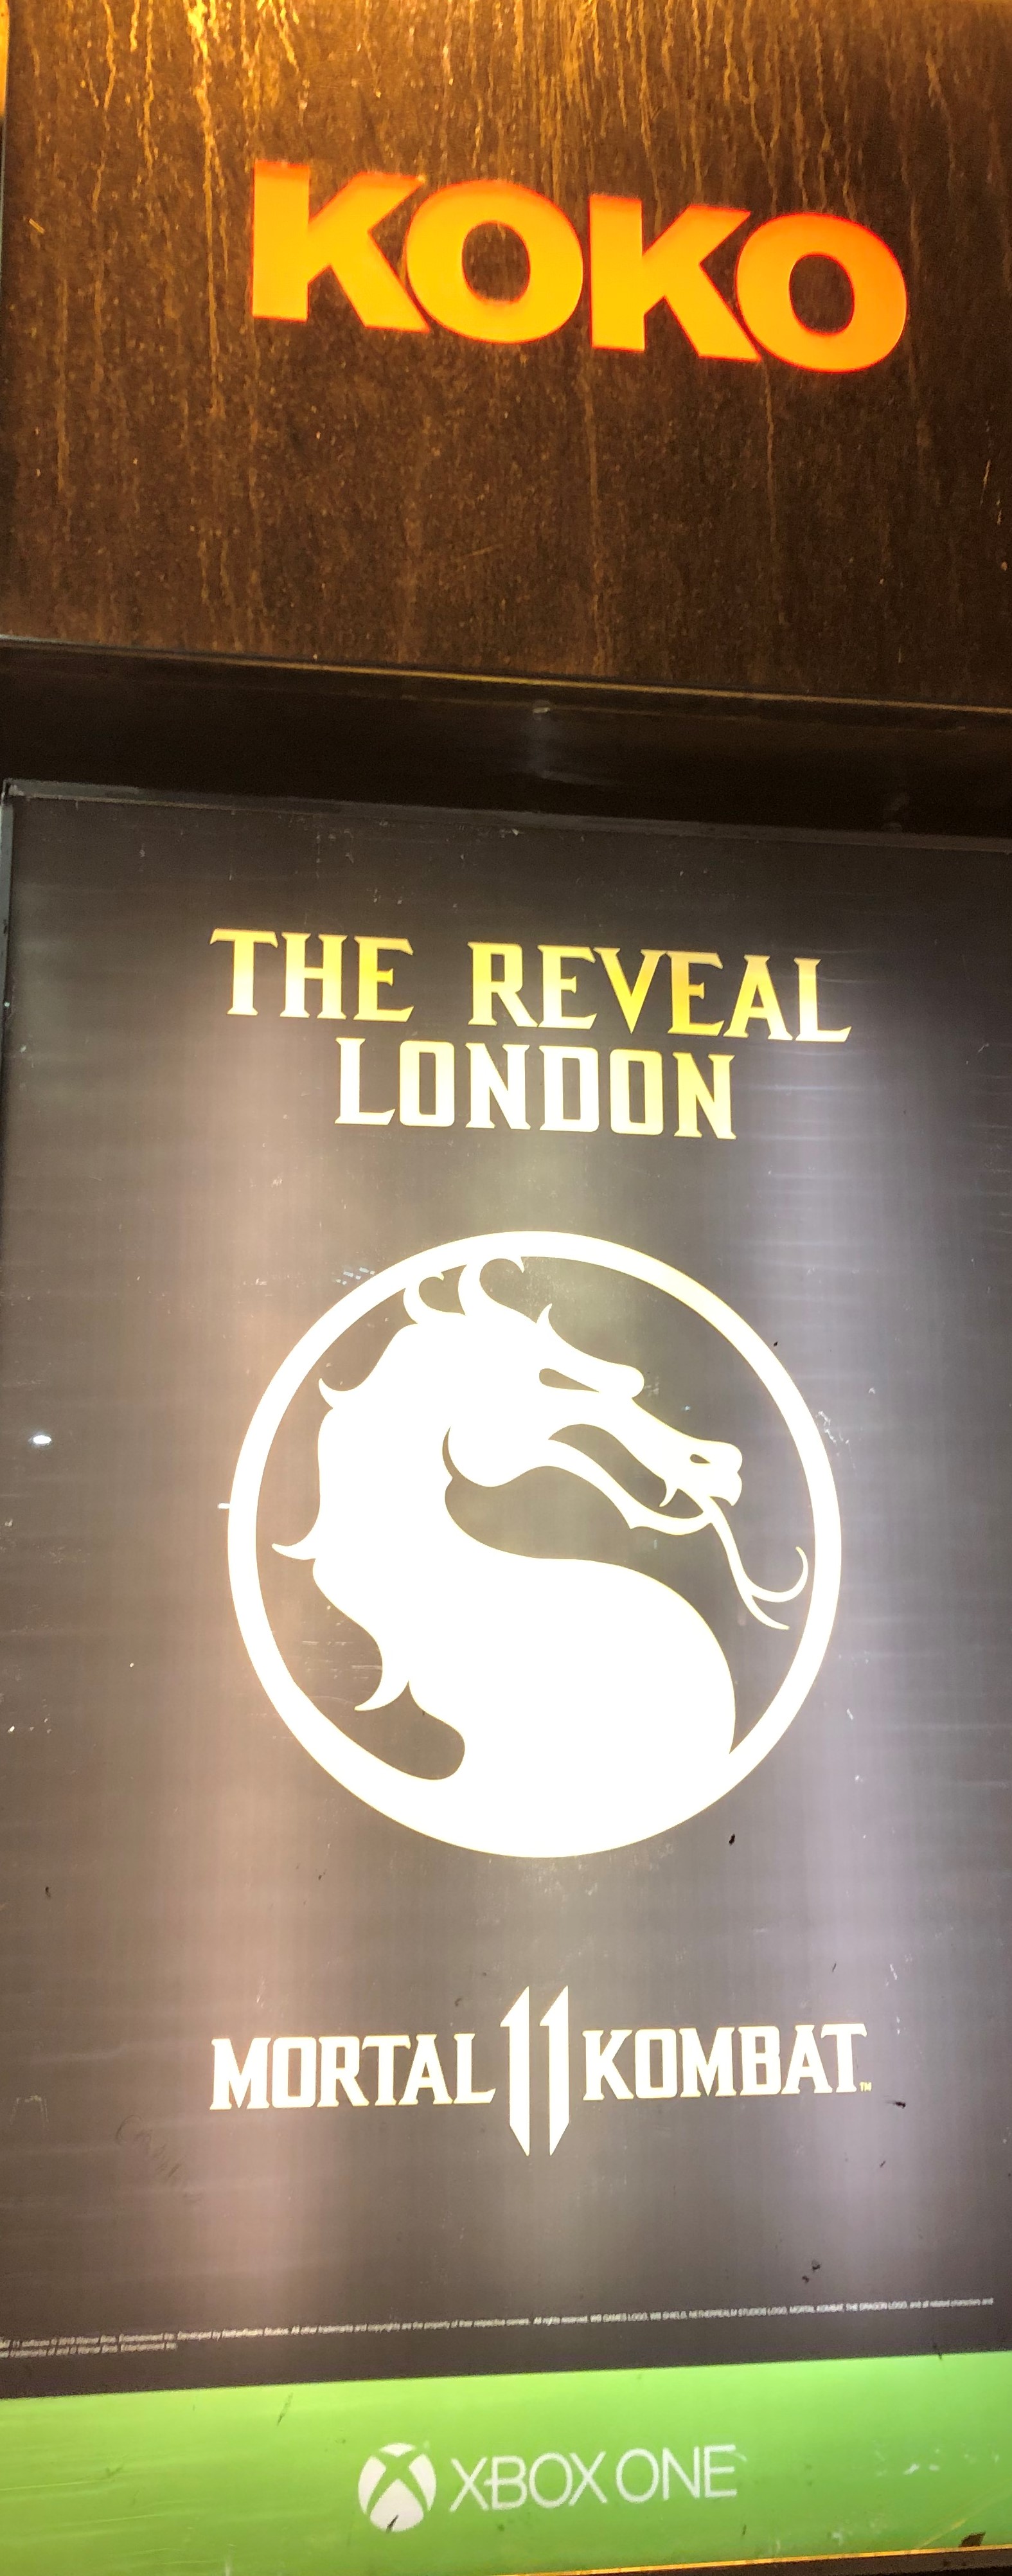 Poster showing Mortal Kombat symbol and the words "The reveal, London"